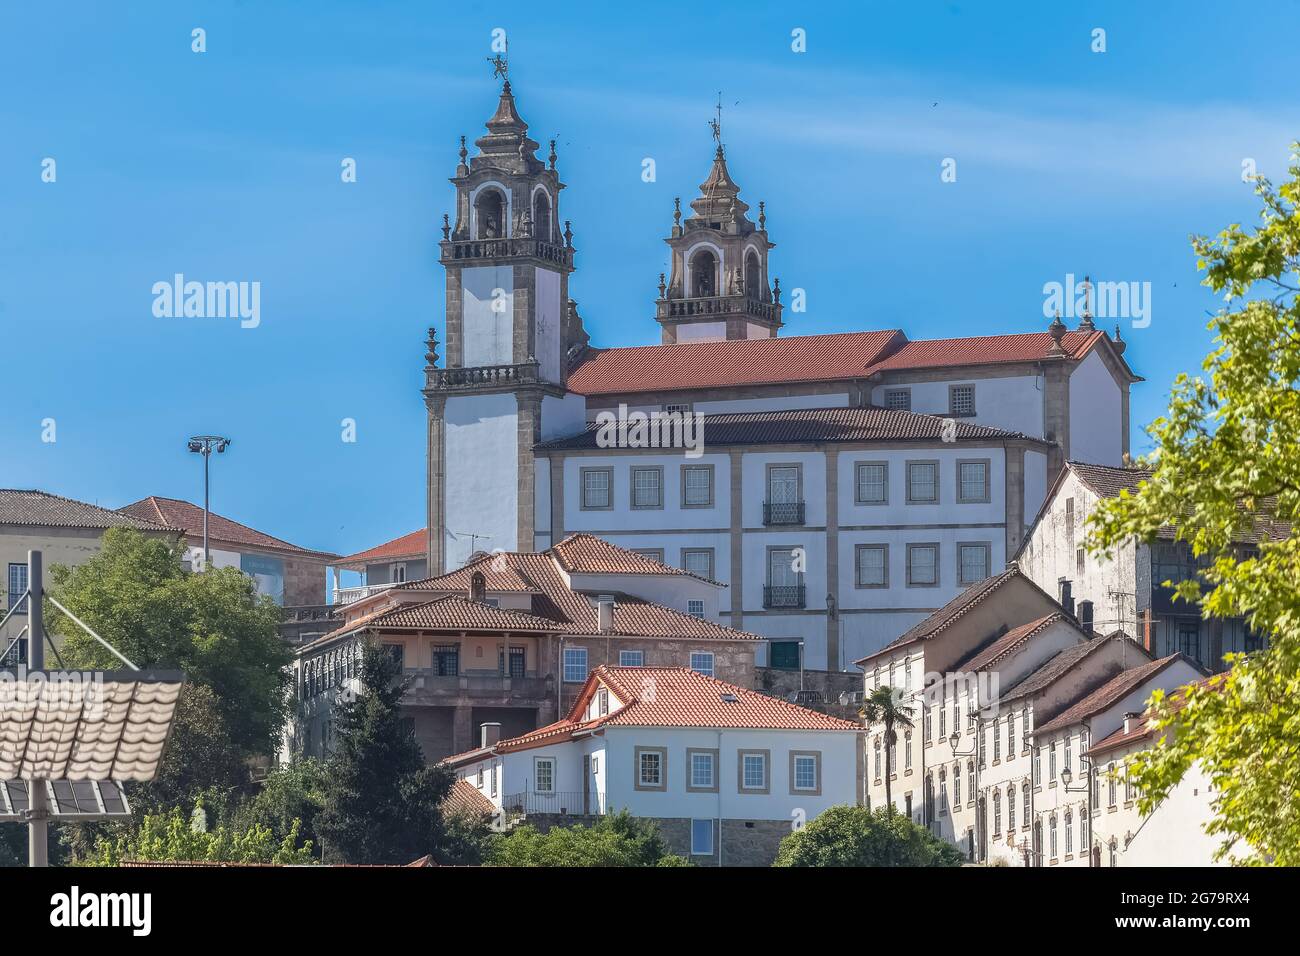 Viseu / Portugal - 05/08/2021 : View at the lateral facade of Church of Mercy, baroque style monument, architectural icon of the city of Viseu, in Por Stock Photo